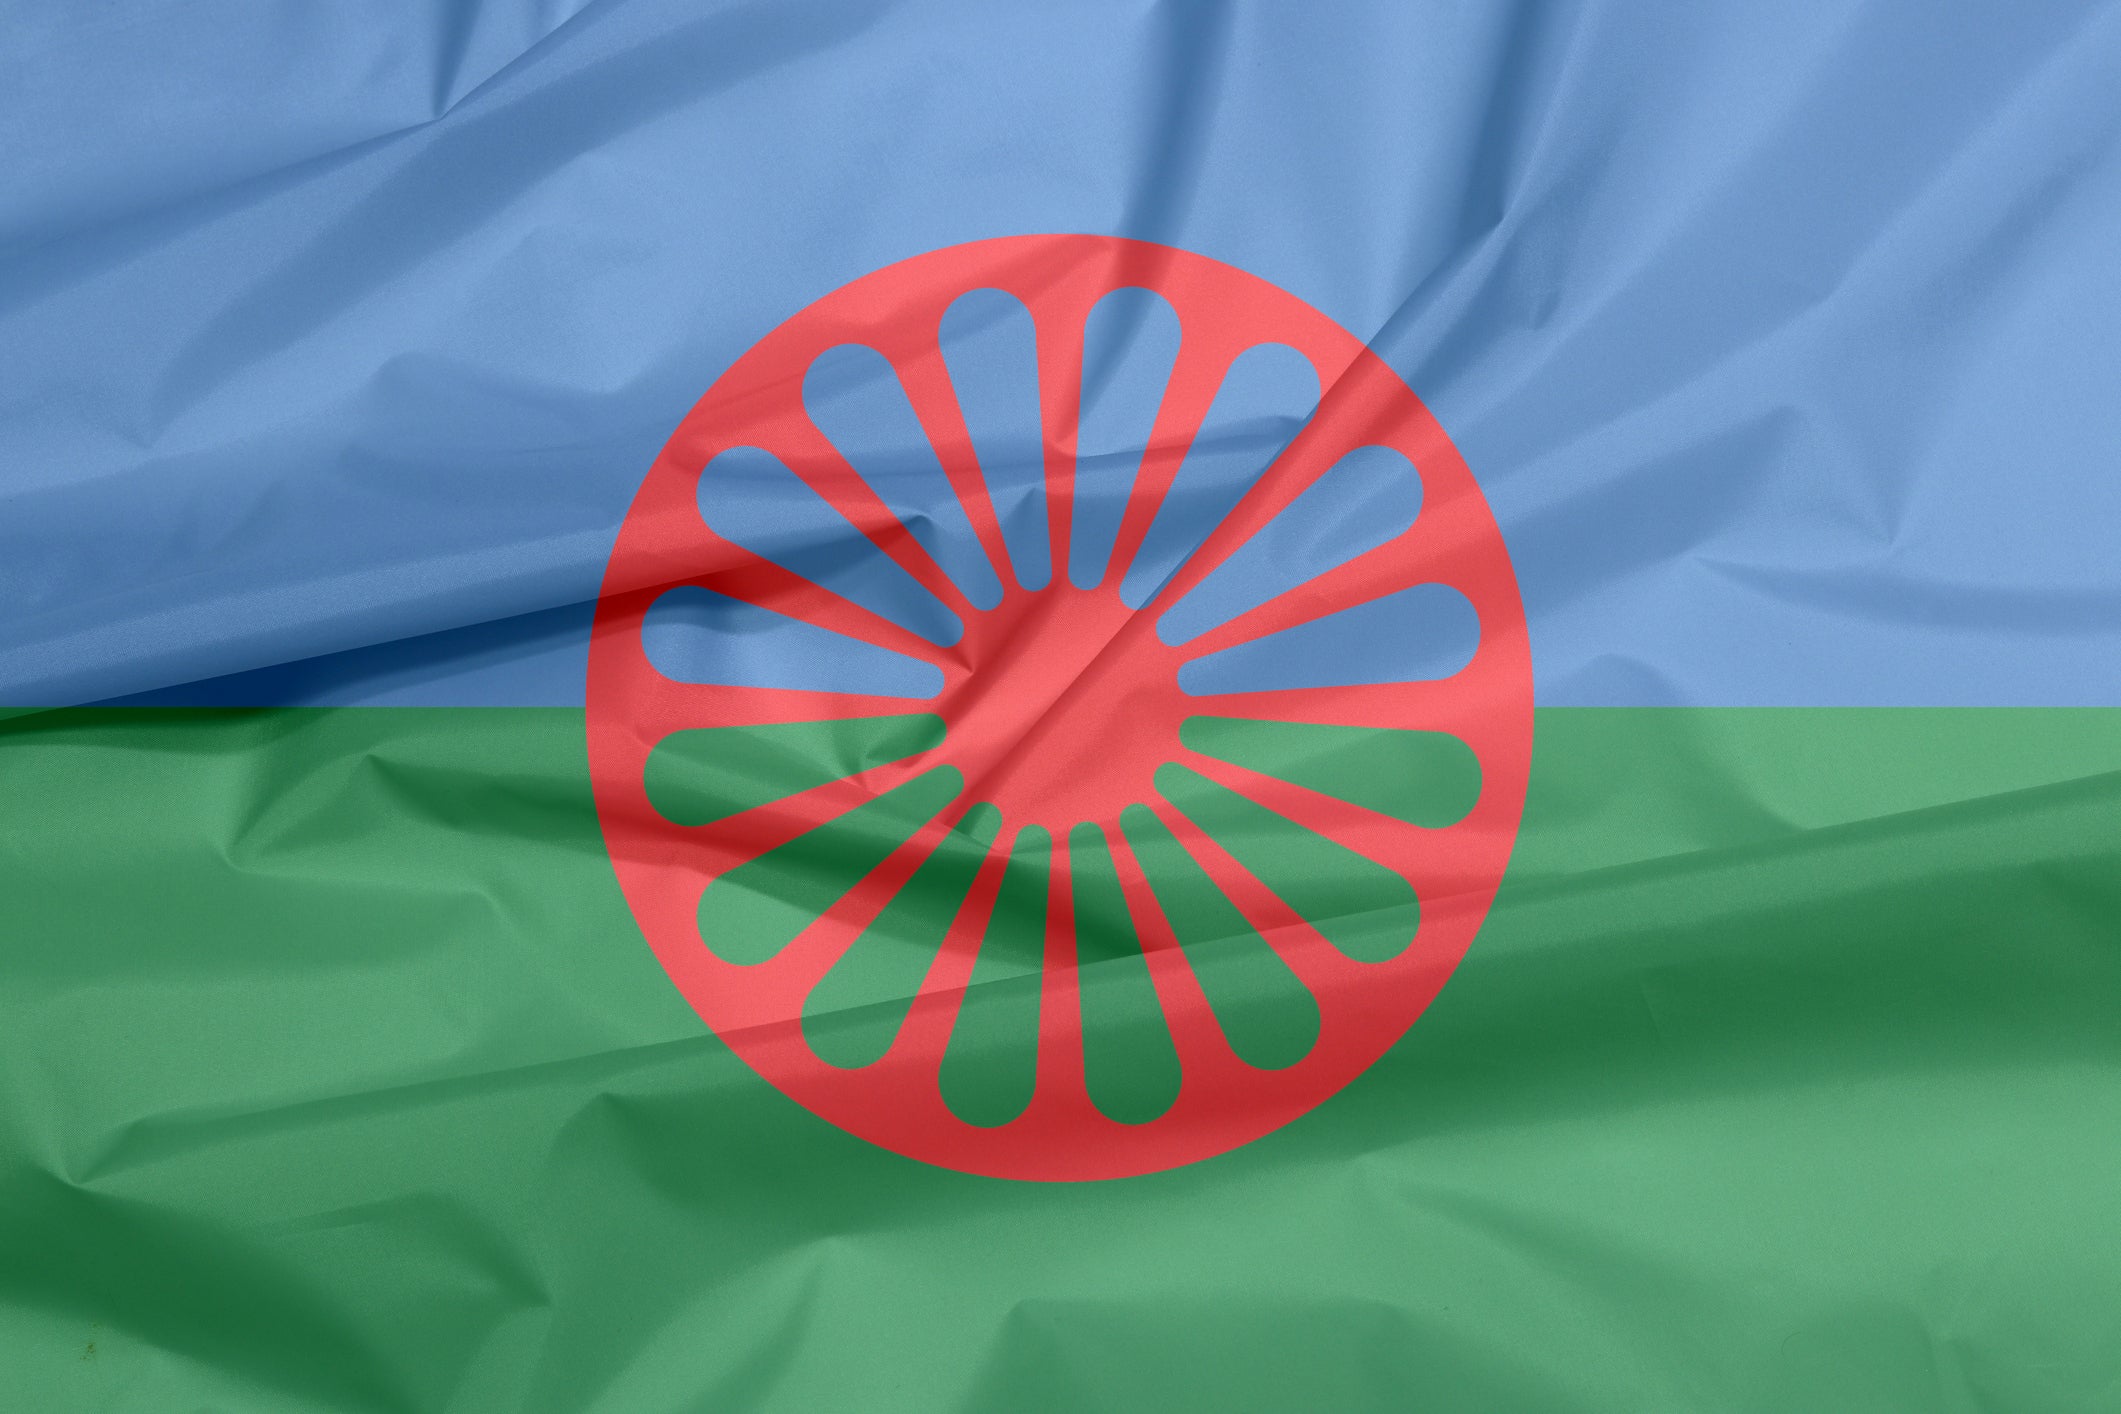 Romani communities (whose flag is shown here) have been in the UK since the 15th century